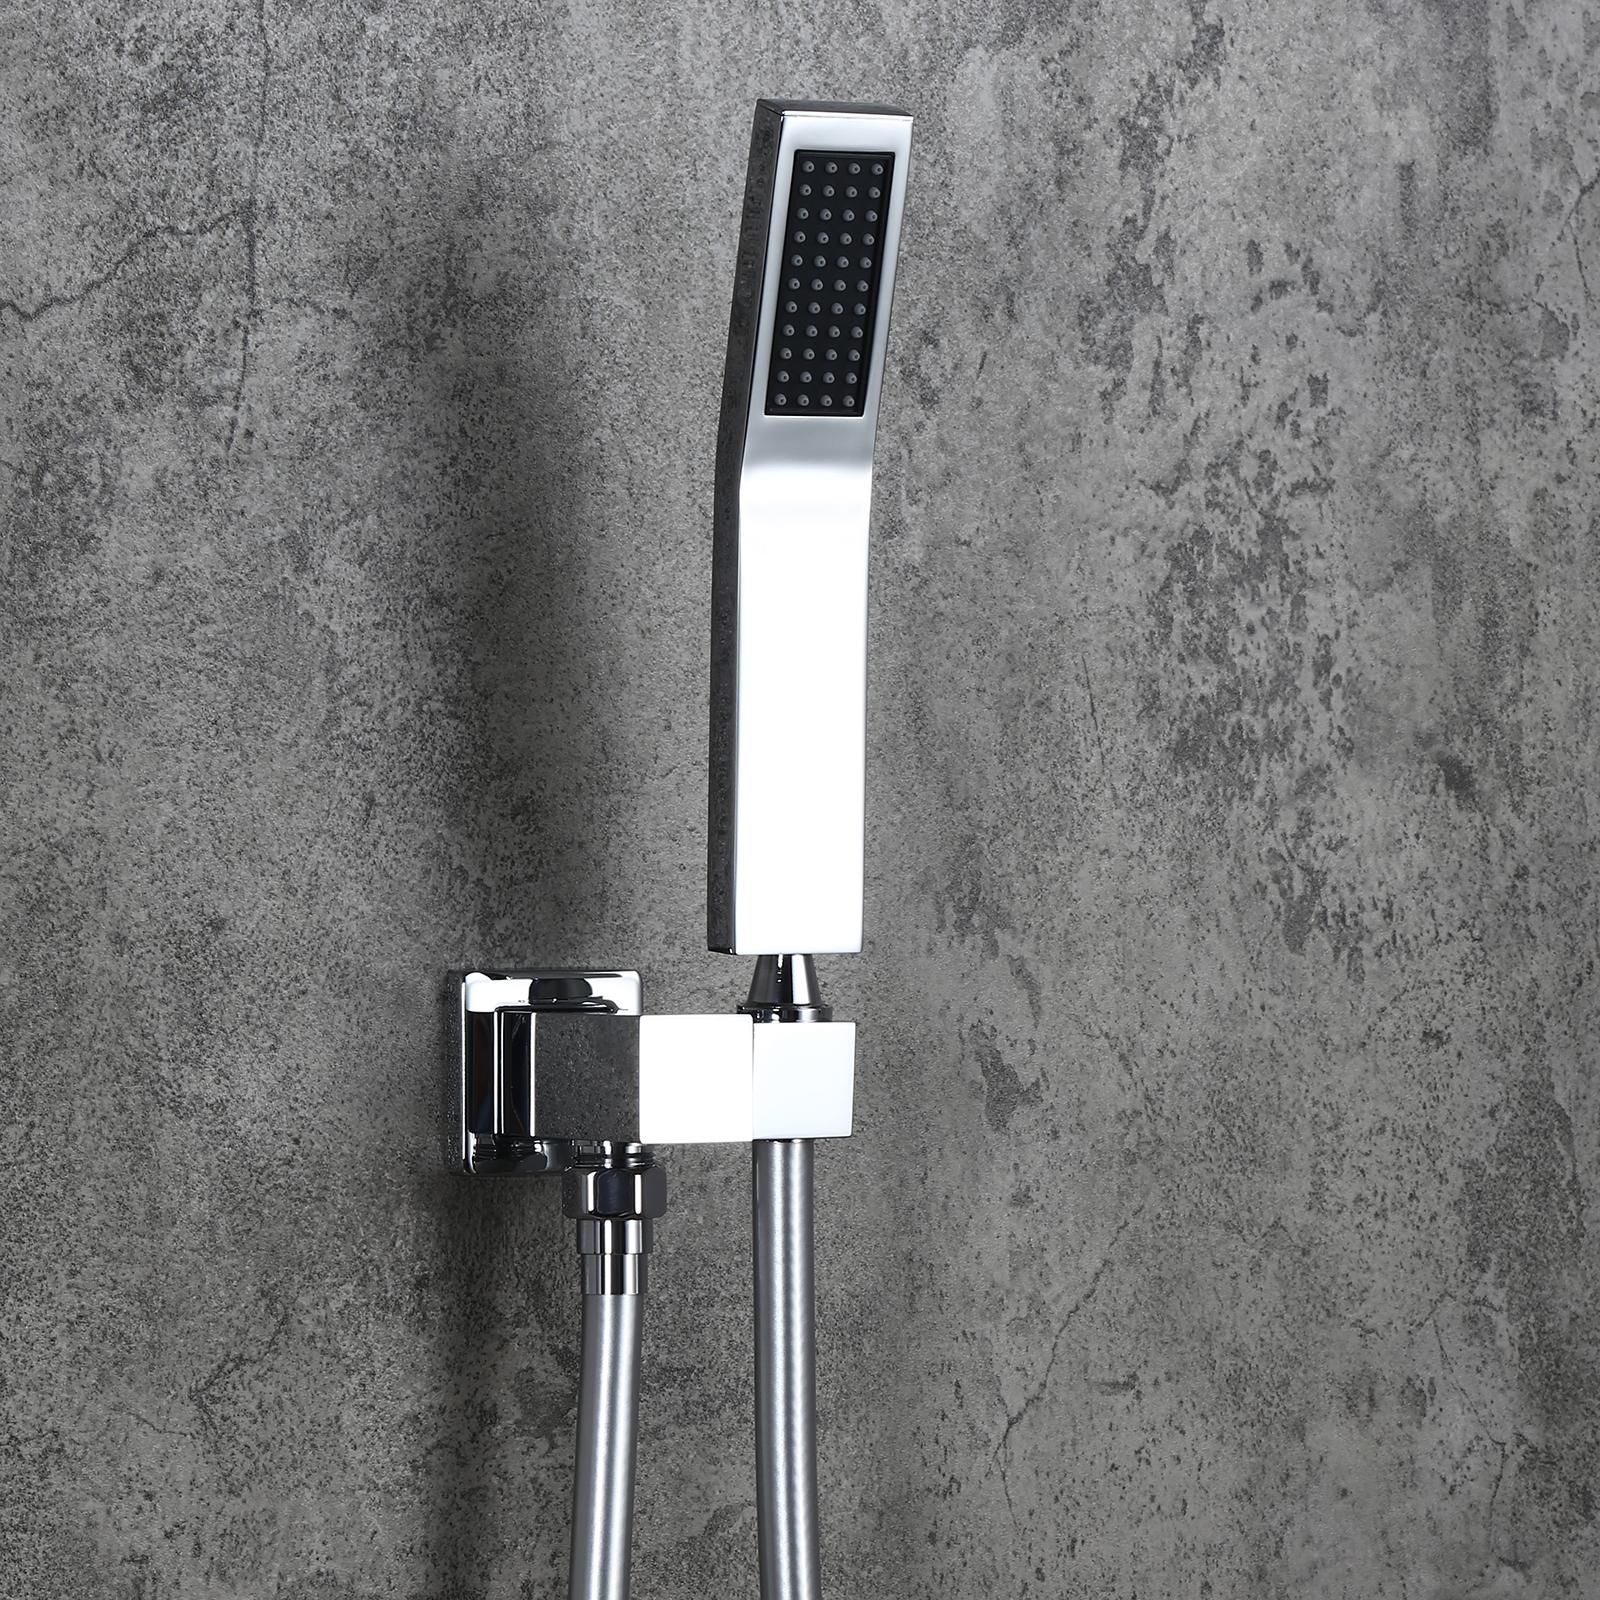 Modern 12" Wall Mounted Shower System with Handheld Shower Pressure Balance Valve